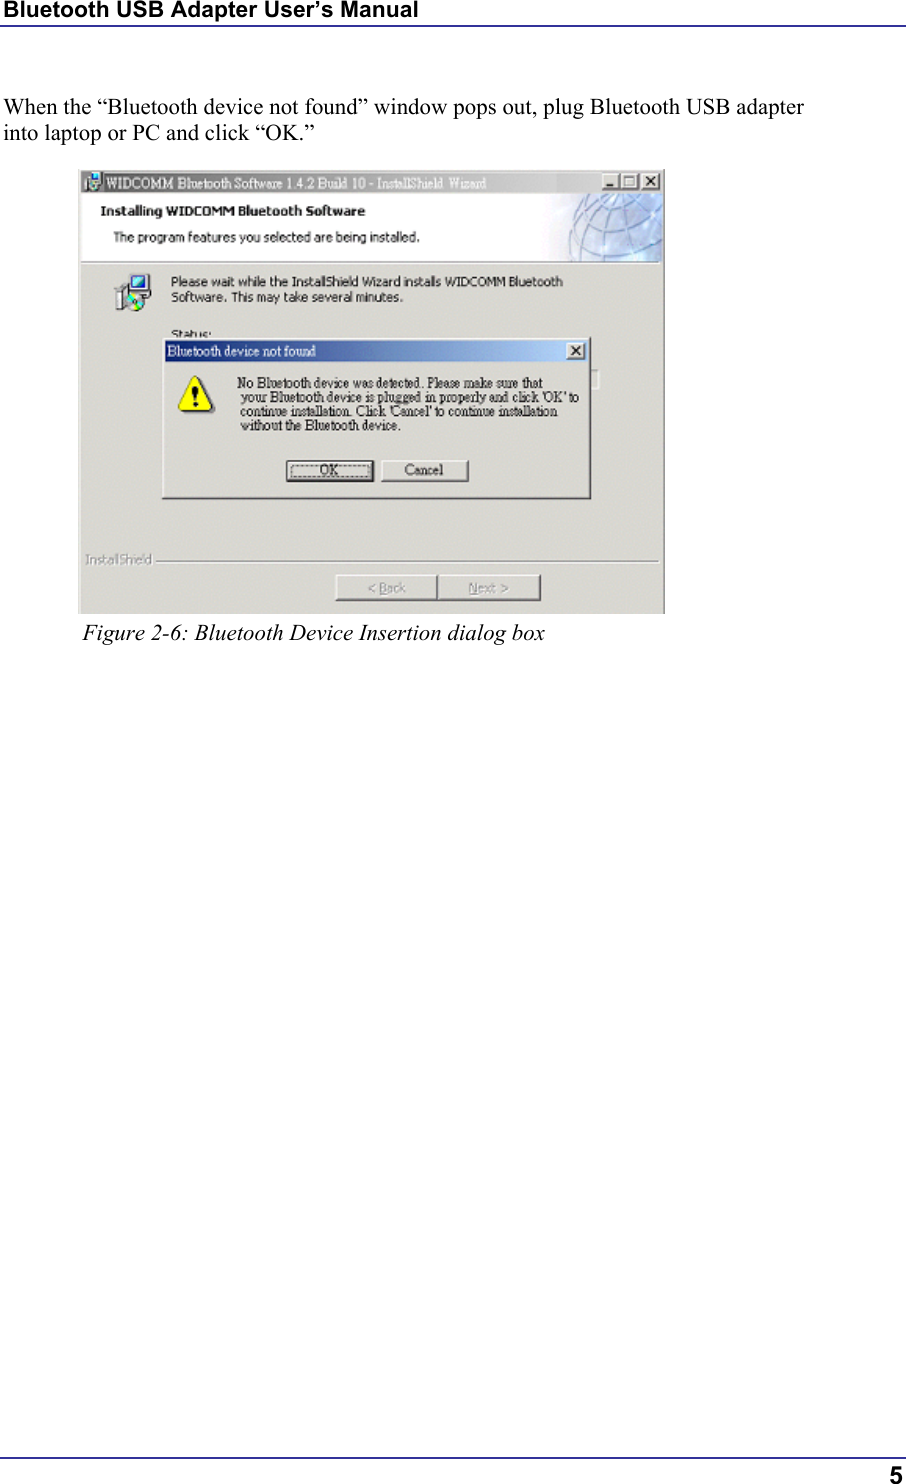 Bluetooth USB Adapter User’s Manual  When the “Bluetooth device not found” window pops out, plug Bluetooth USB adapter into laptop or PC and click “OK.”            Figure 2-6: Bluetooth Device Insertion dialog box        5 